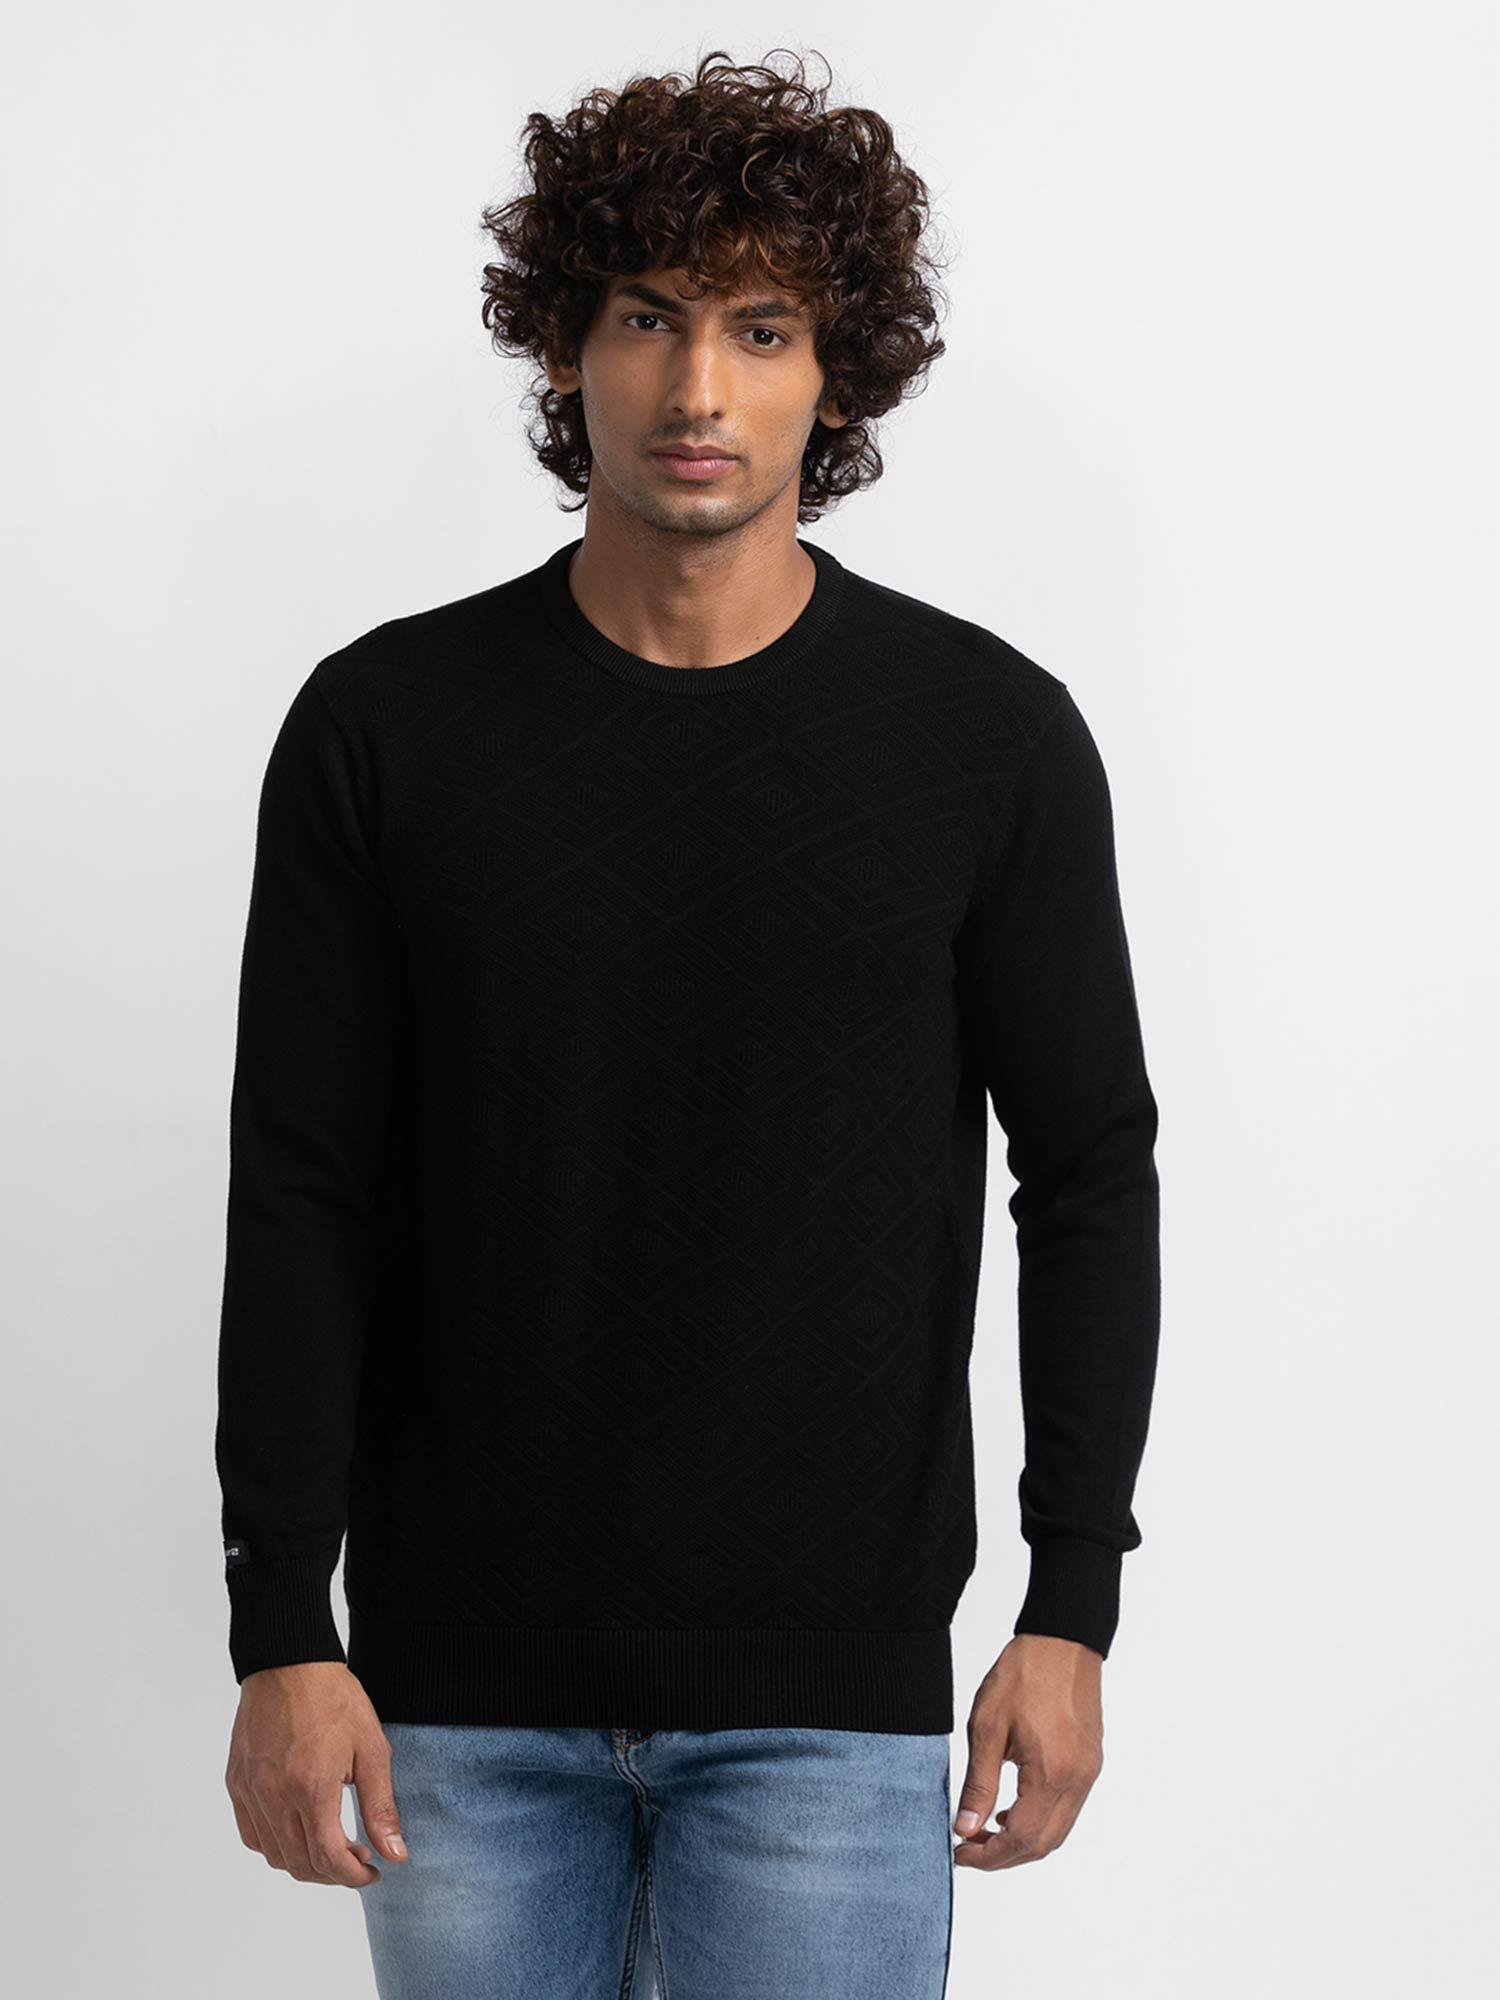 Black Cotton Full Sleeve Casual Sweater for Men